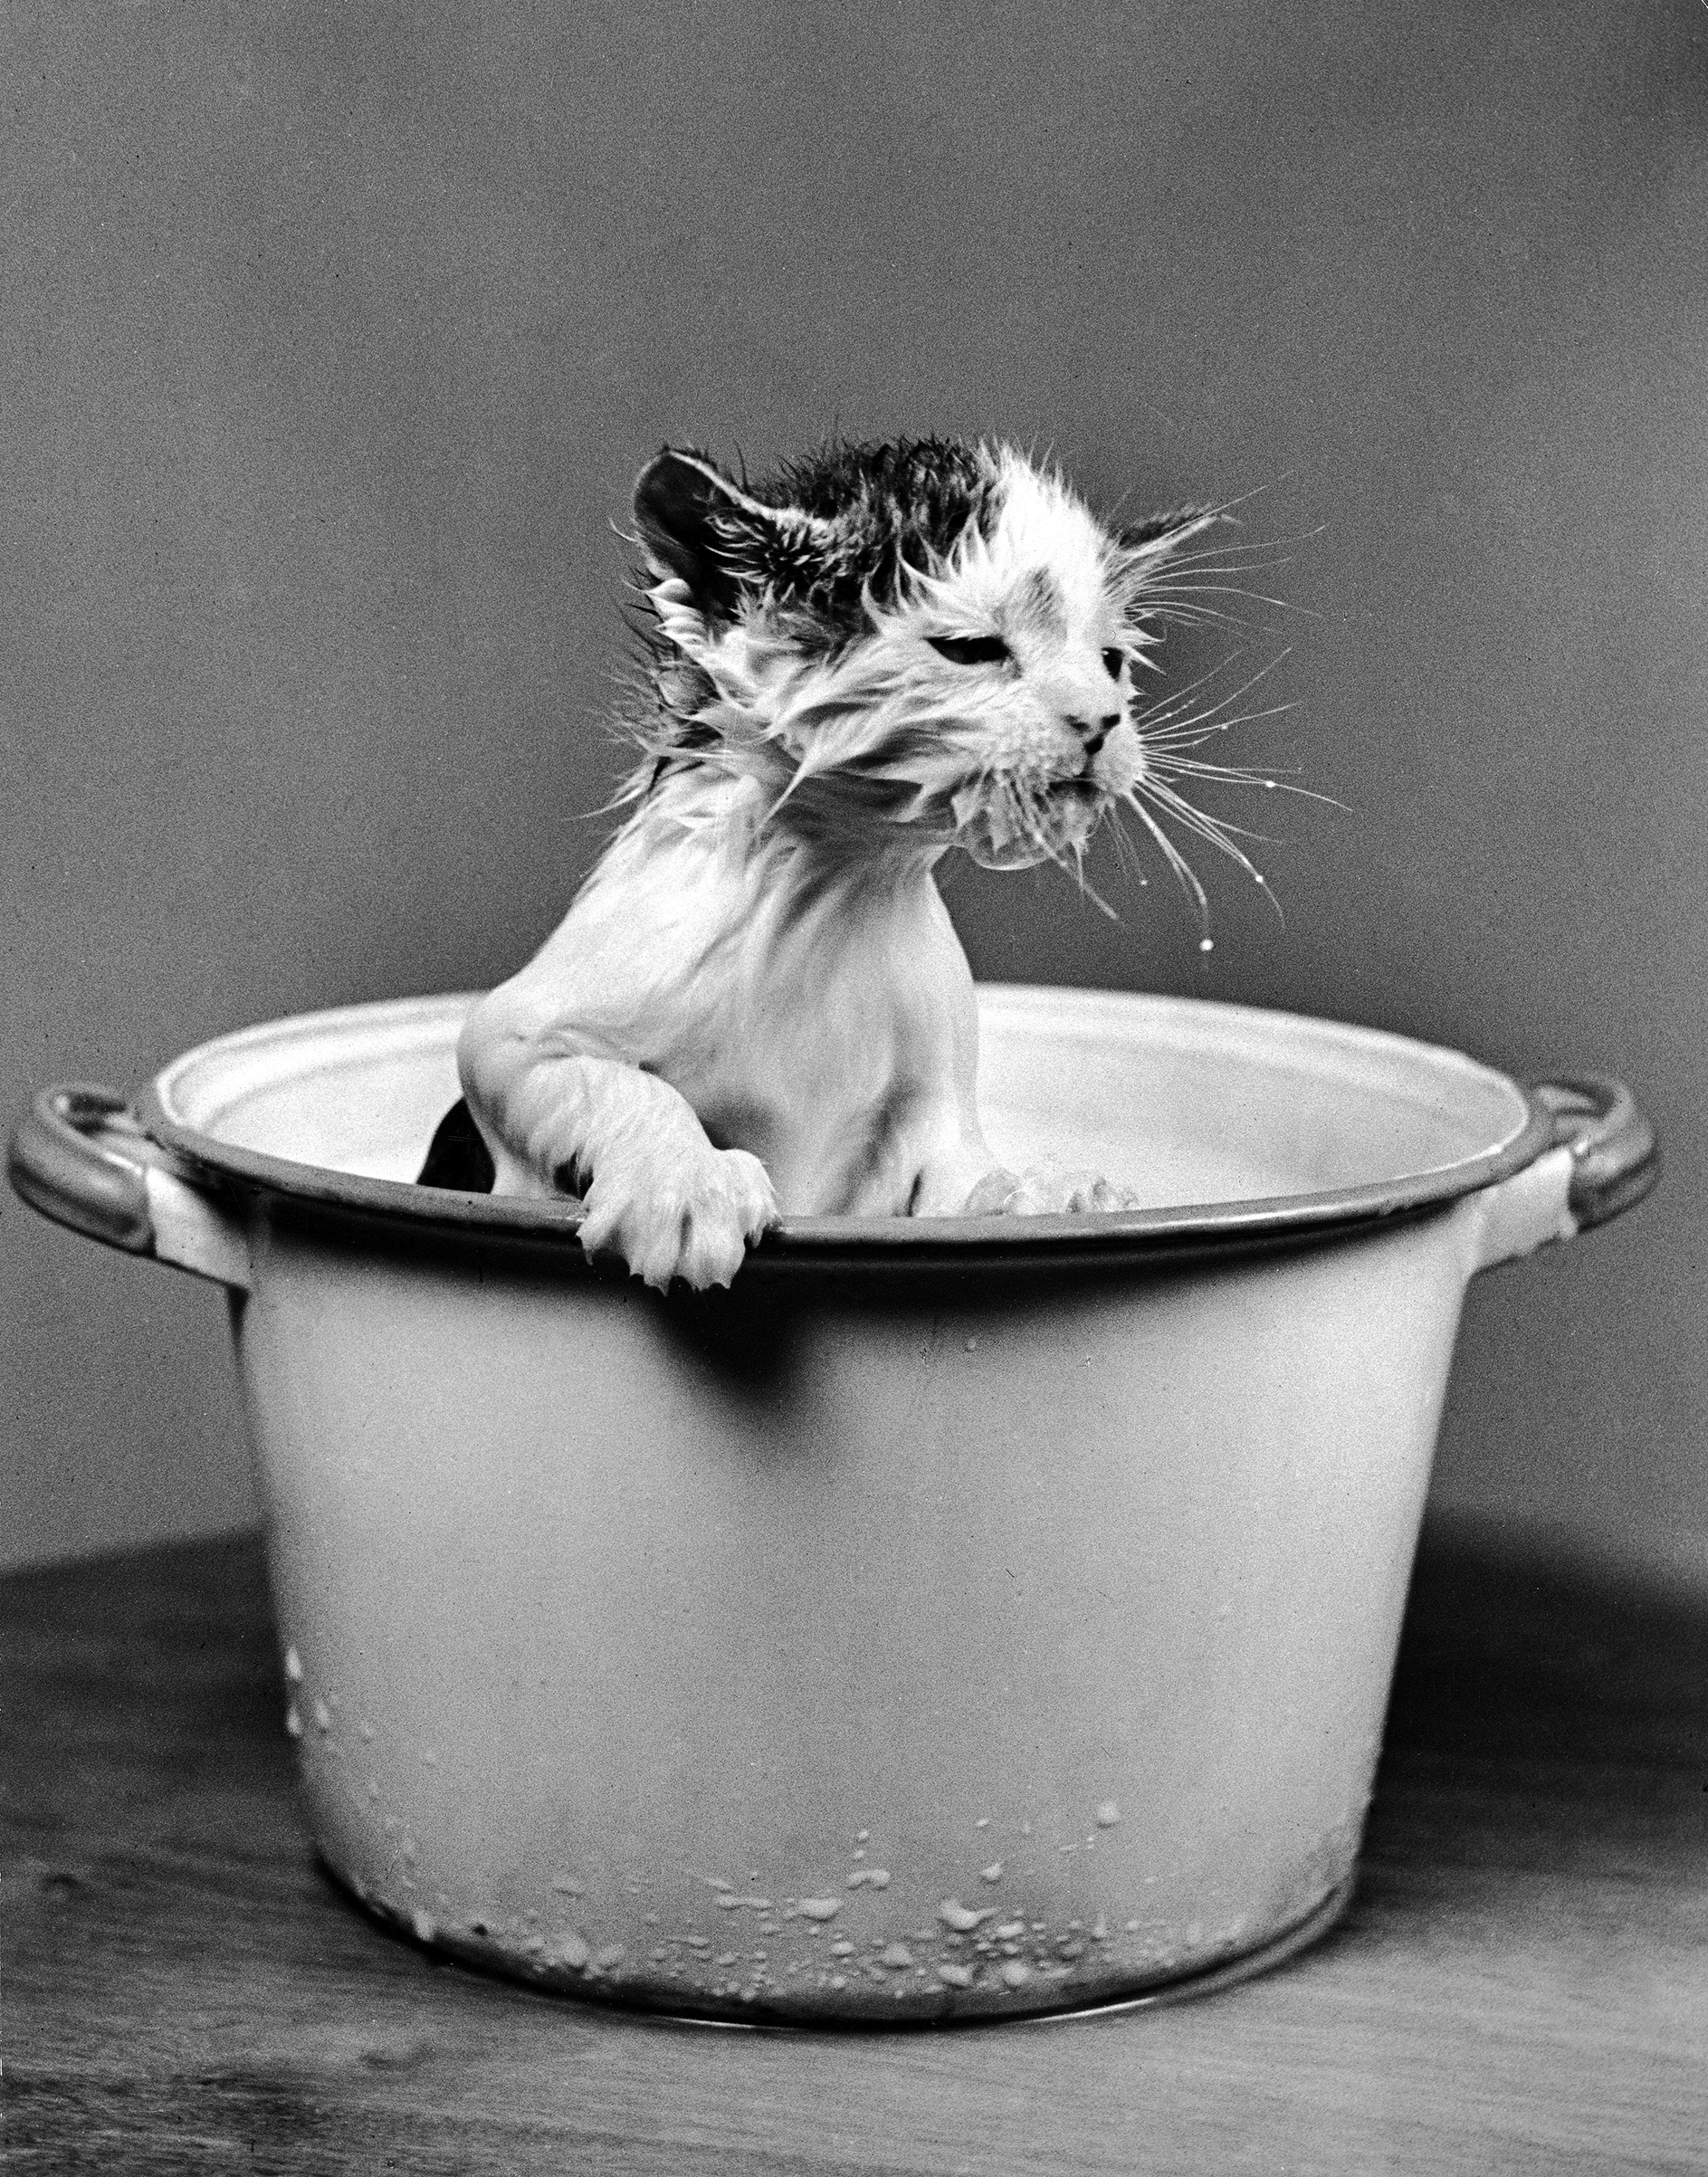 Kitten emerging from pot of milk after falling into it, 1940.